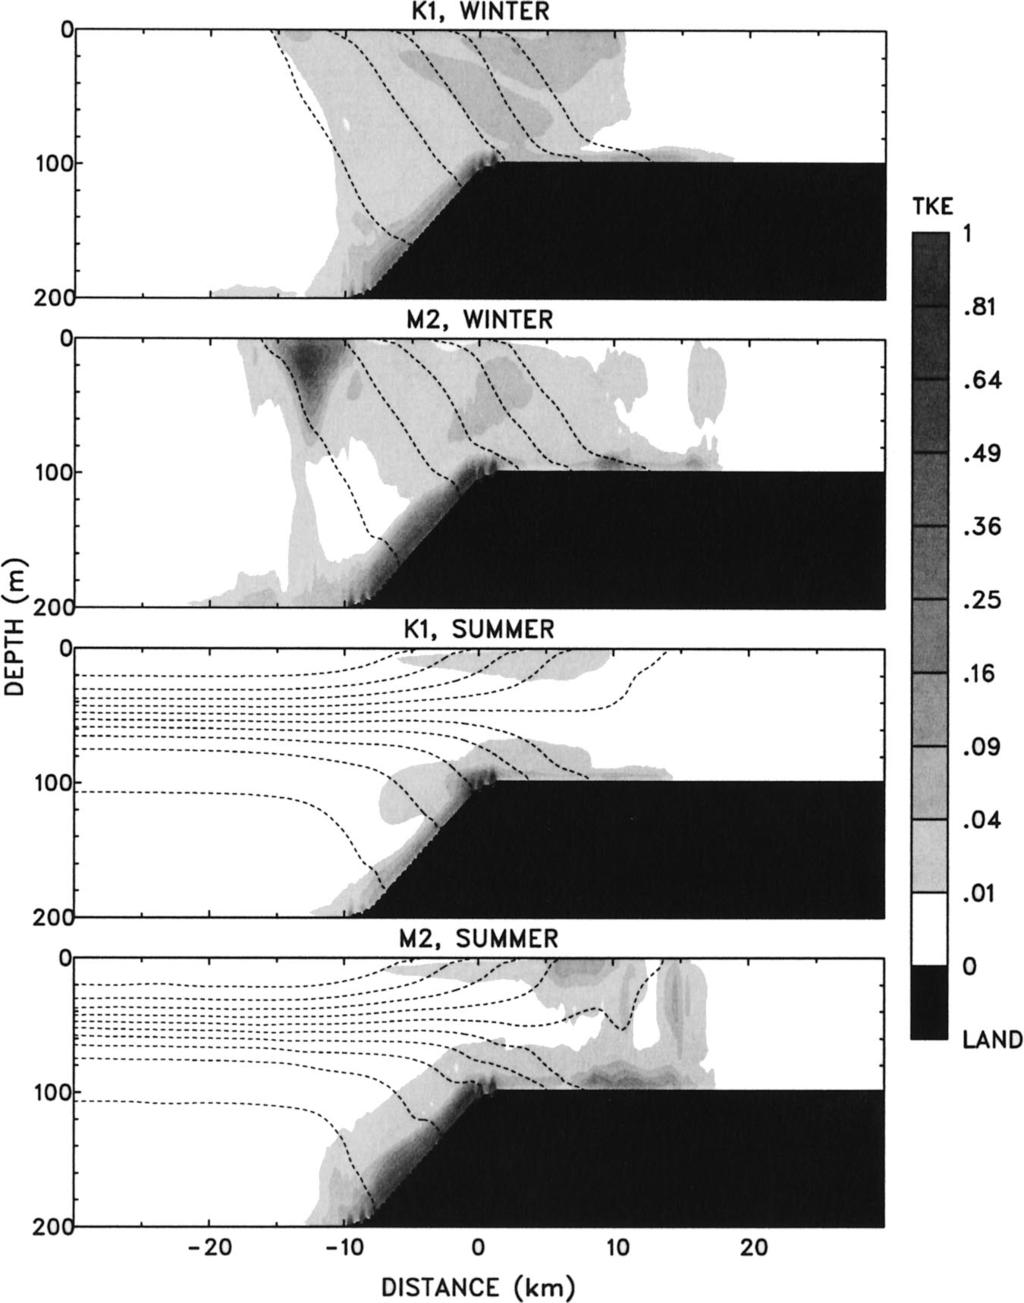 182 JOURNAL OF PHYSICAL OCEANOGRAPHY VOLUME 33 FIG. 10. Mean turbulent kinetic energy (J m 3 ) for different cases (shades). Density field is shown as dashed contour lines. zontally.